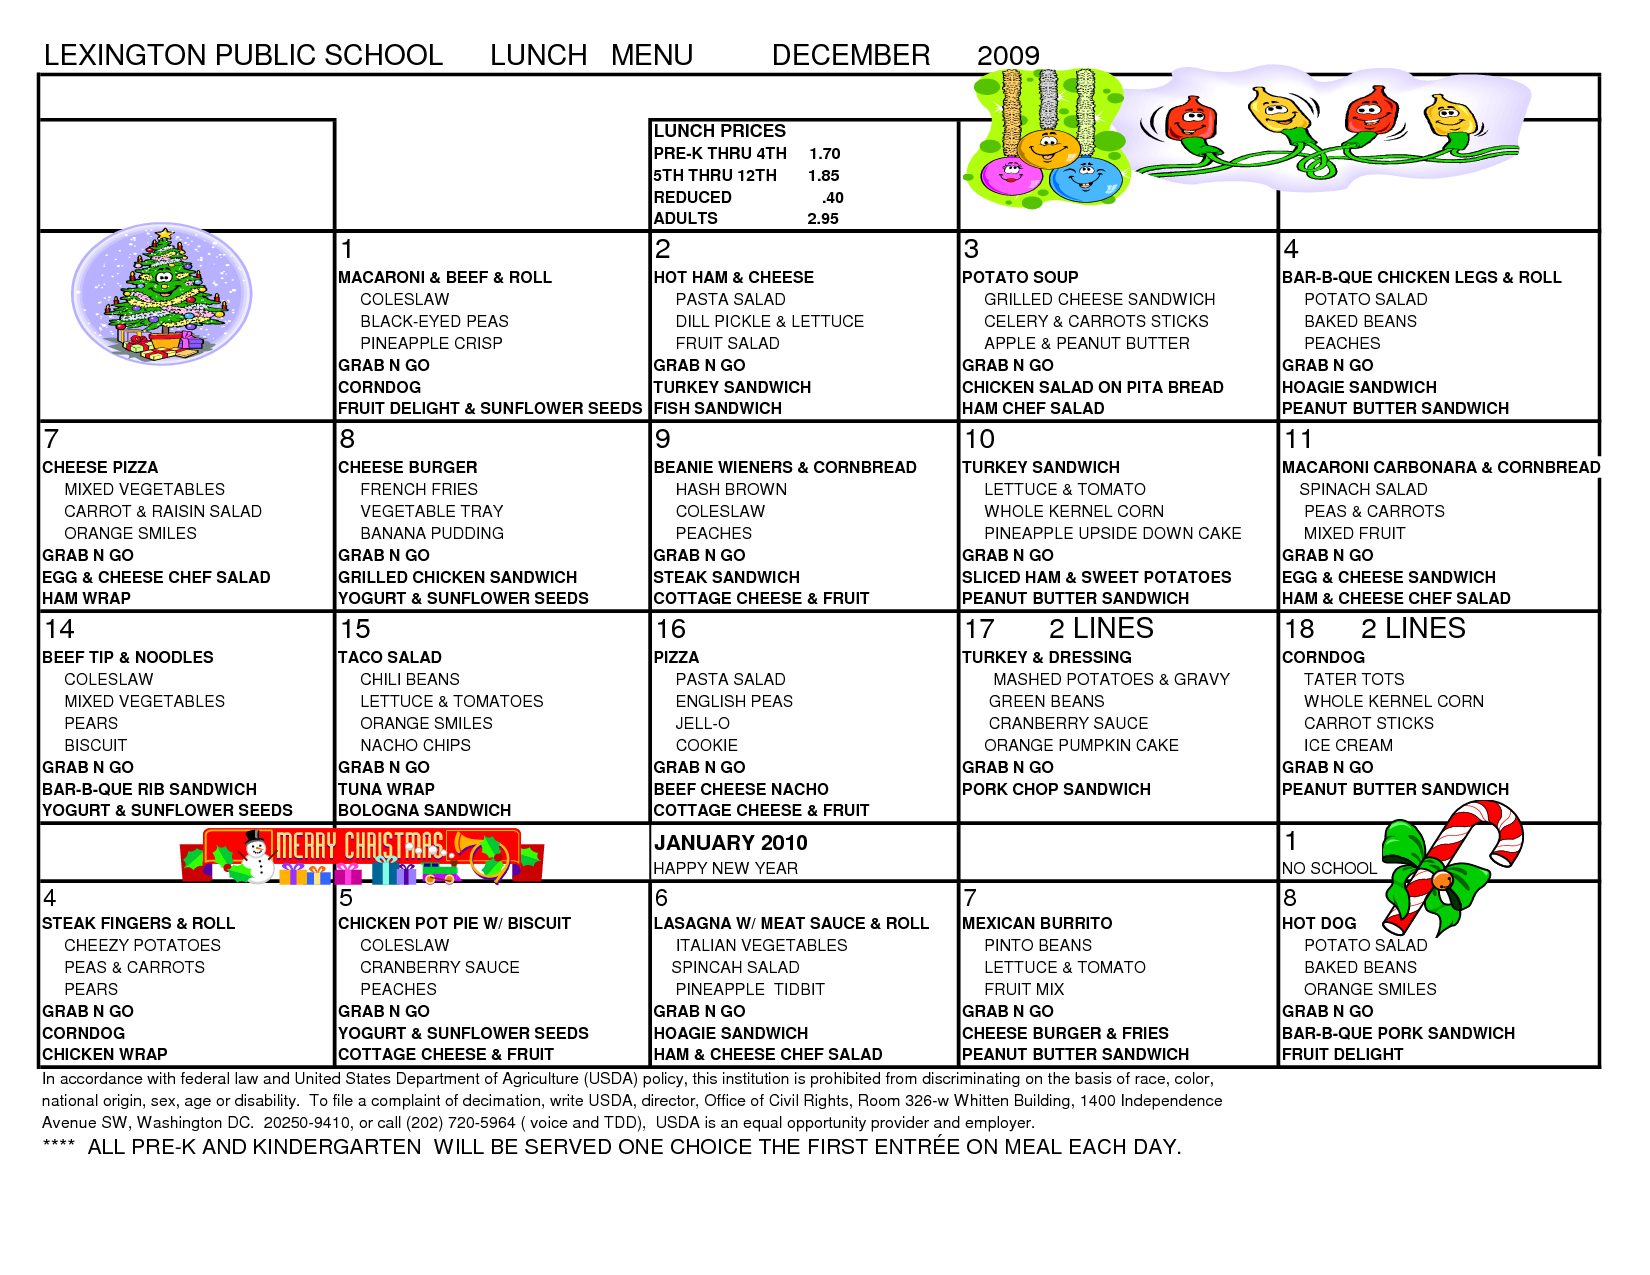 Template For School Lunch Menu printable schedule template